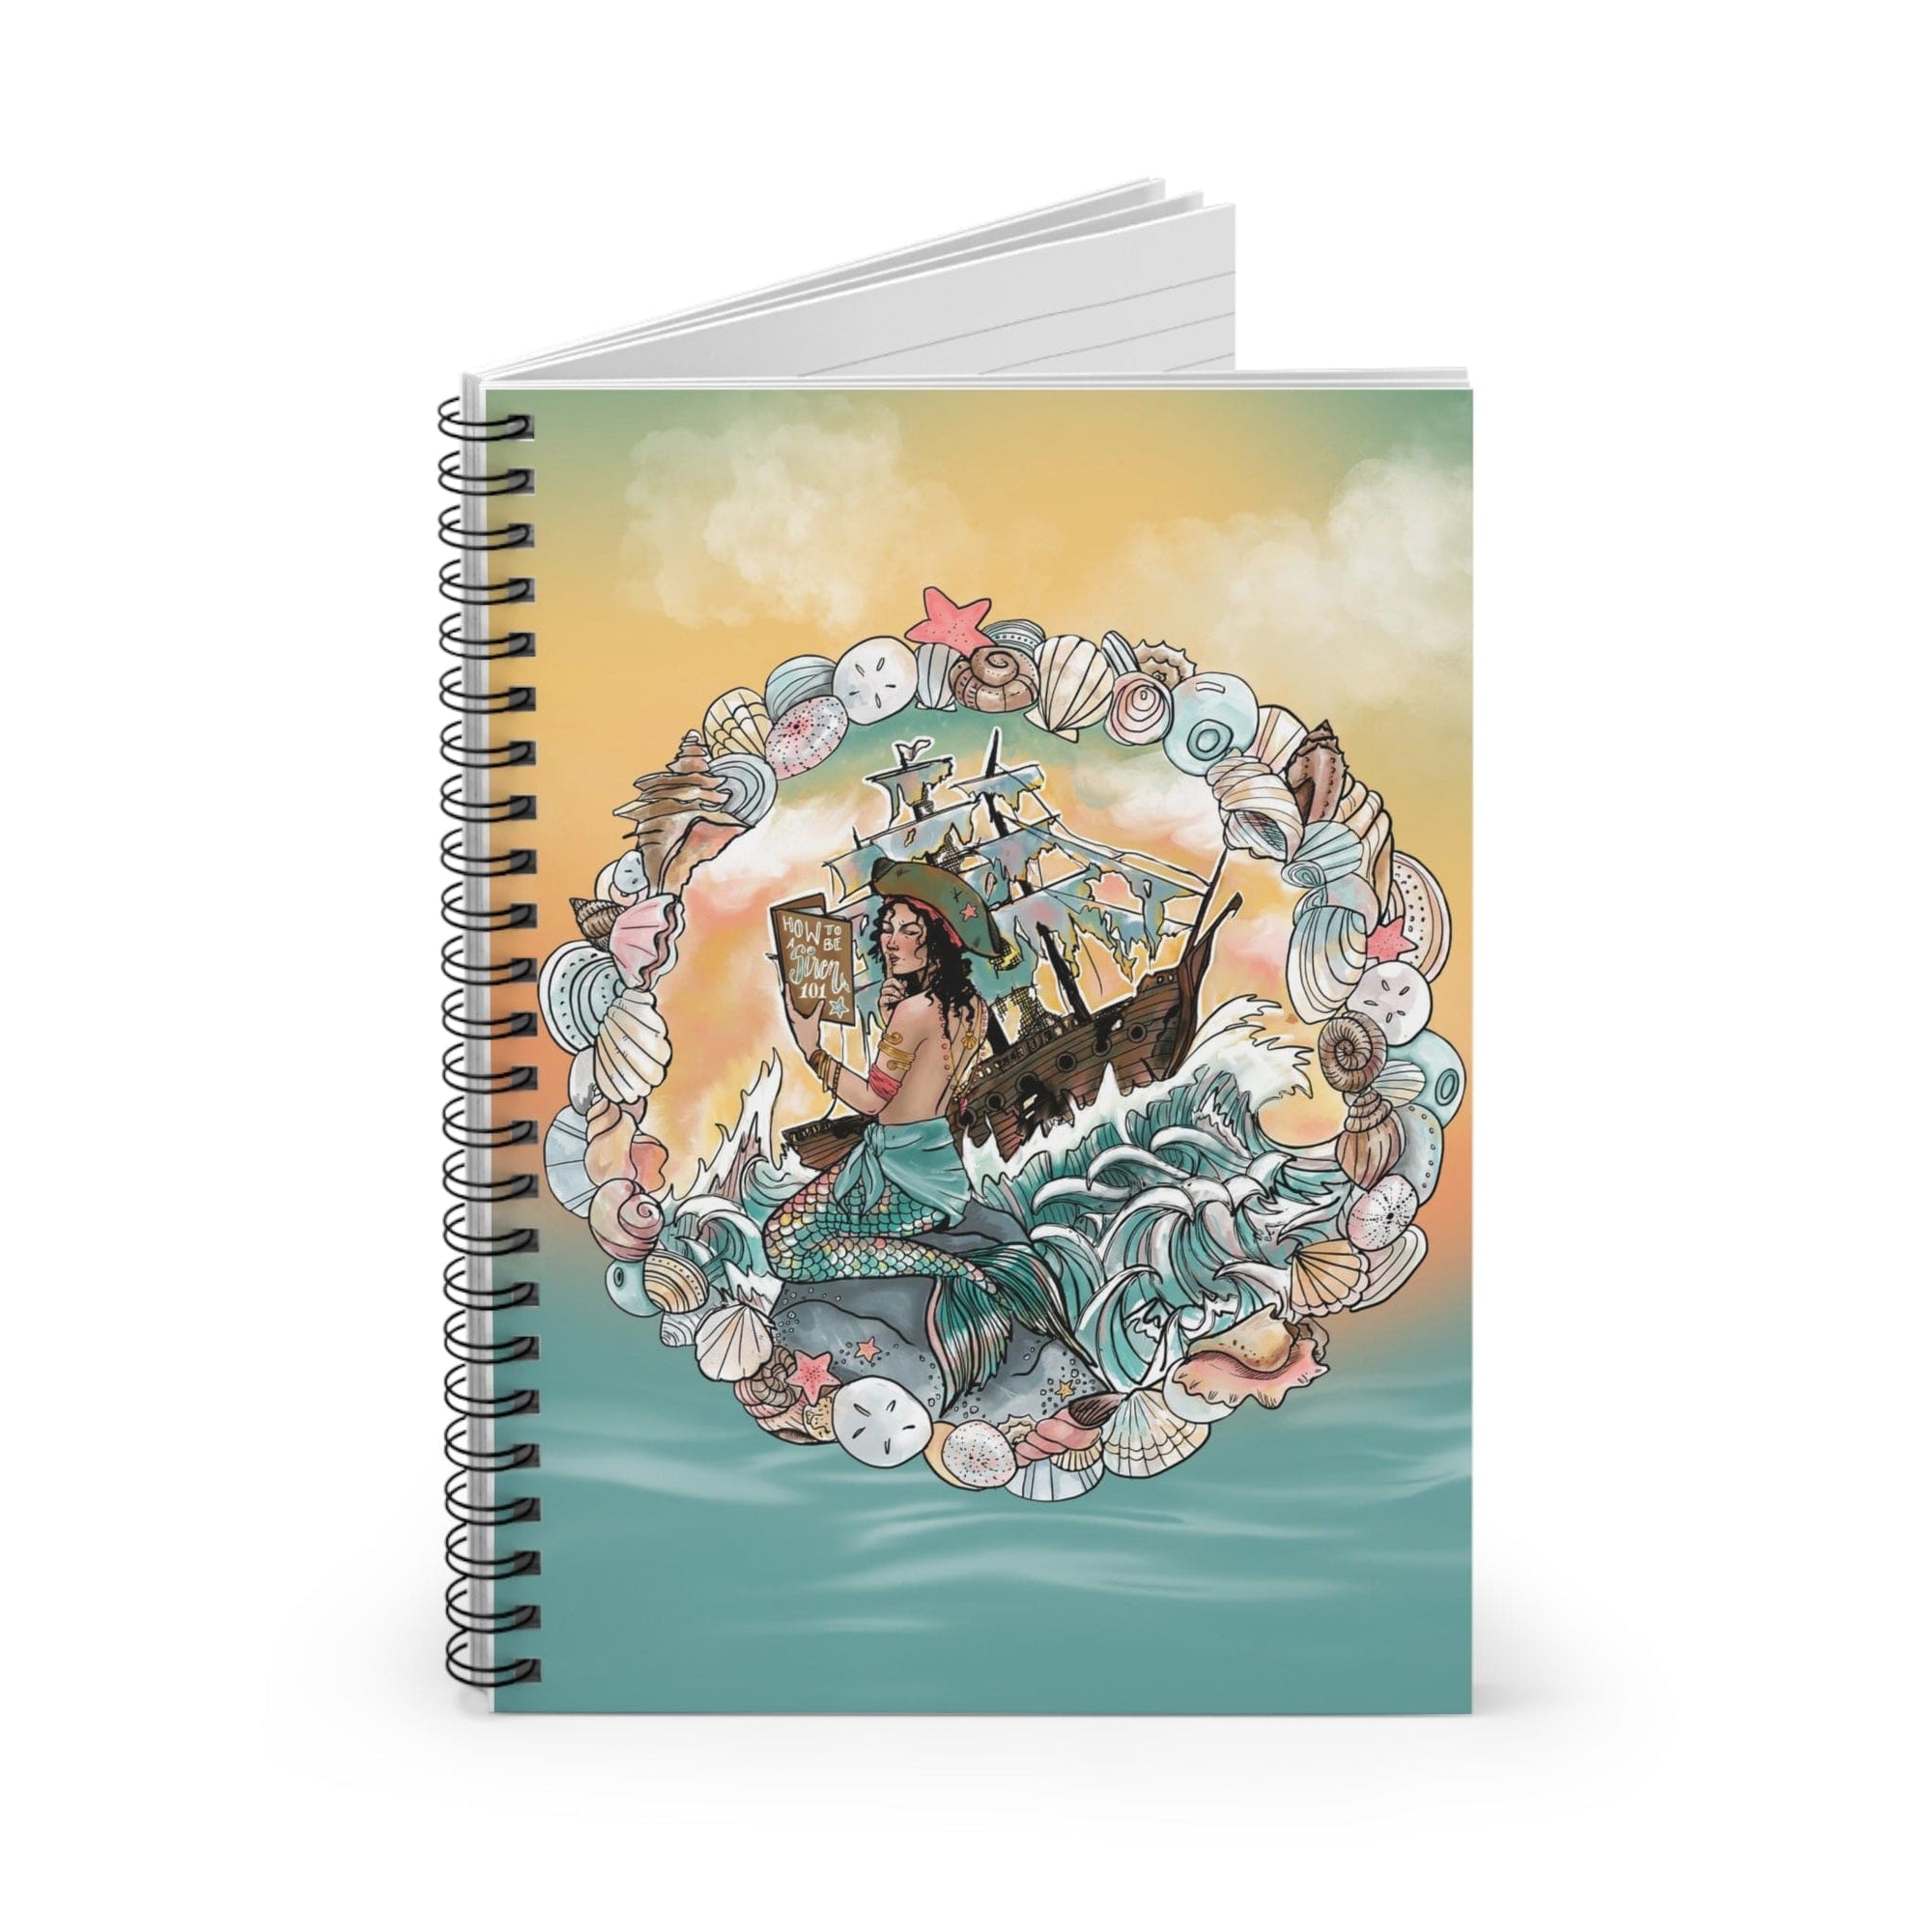 How To Be A Siren 101 Spiral Notebook - Ruled Line - Mountains & Mermaids